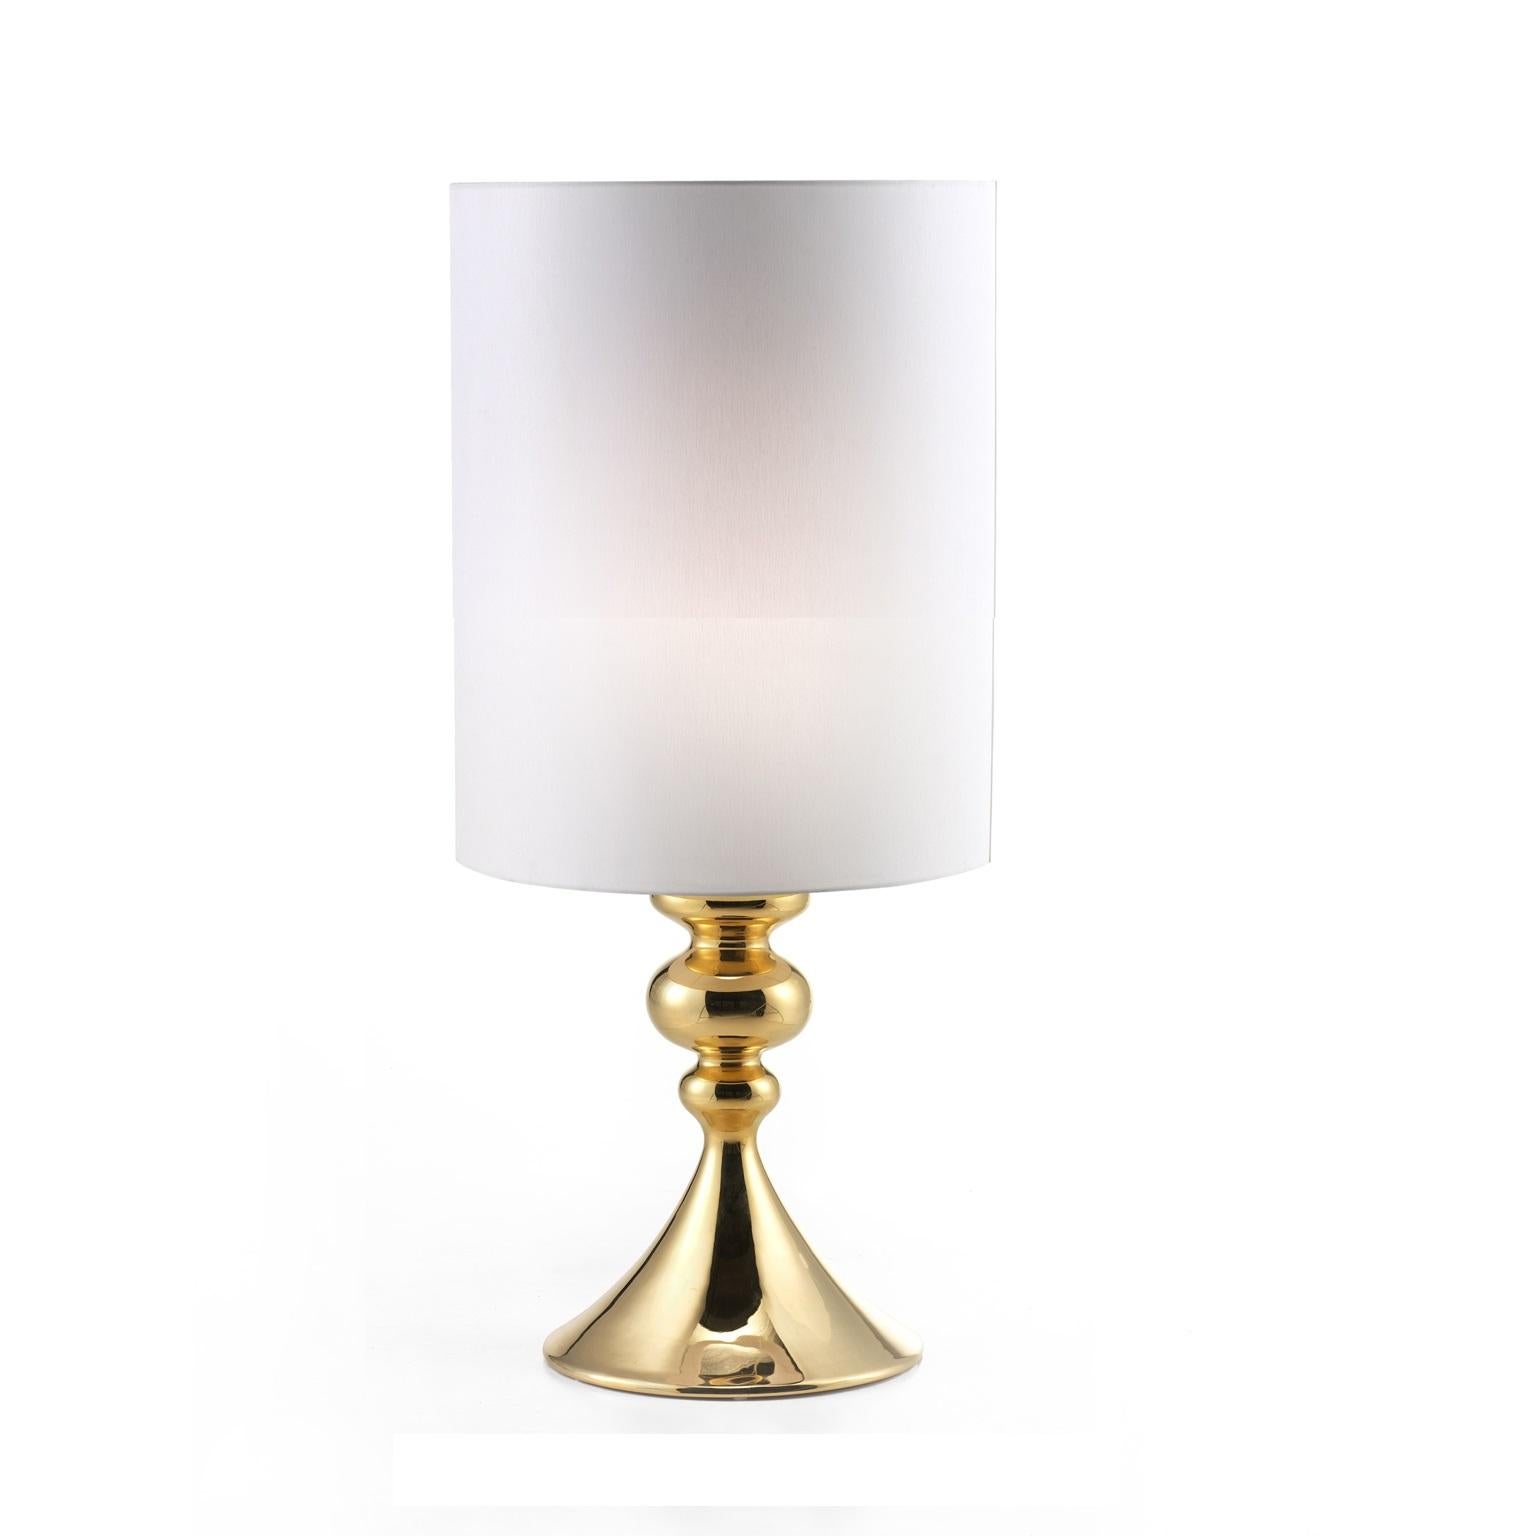 Italian KAY, Ceramic Lamp Handcrafted in 24-Karat Gold by Gabriella B. Made in Italy For Sale